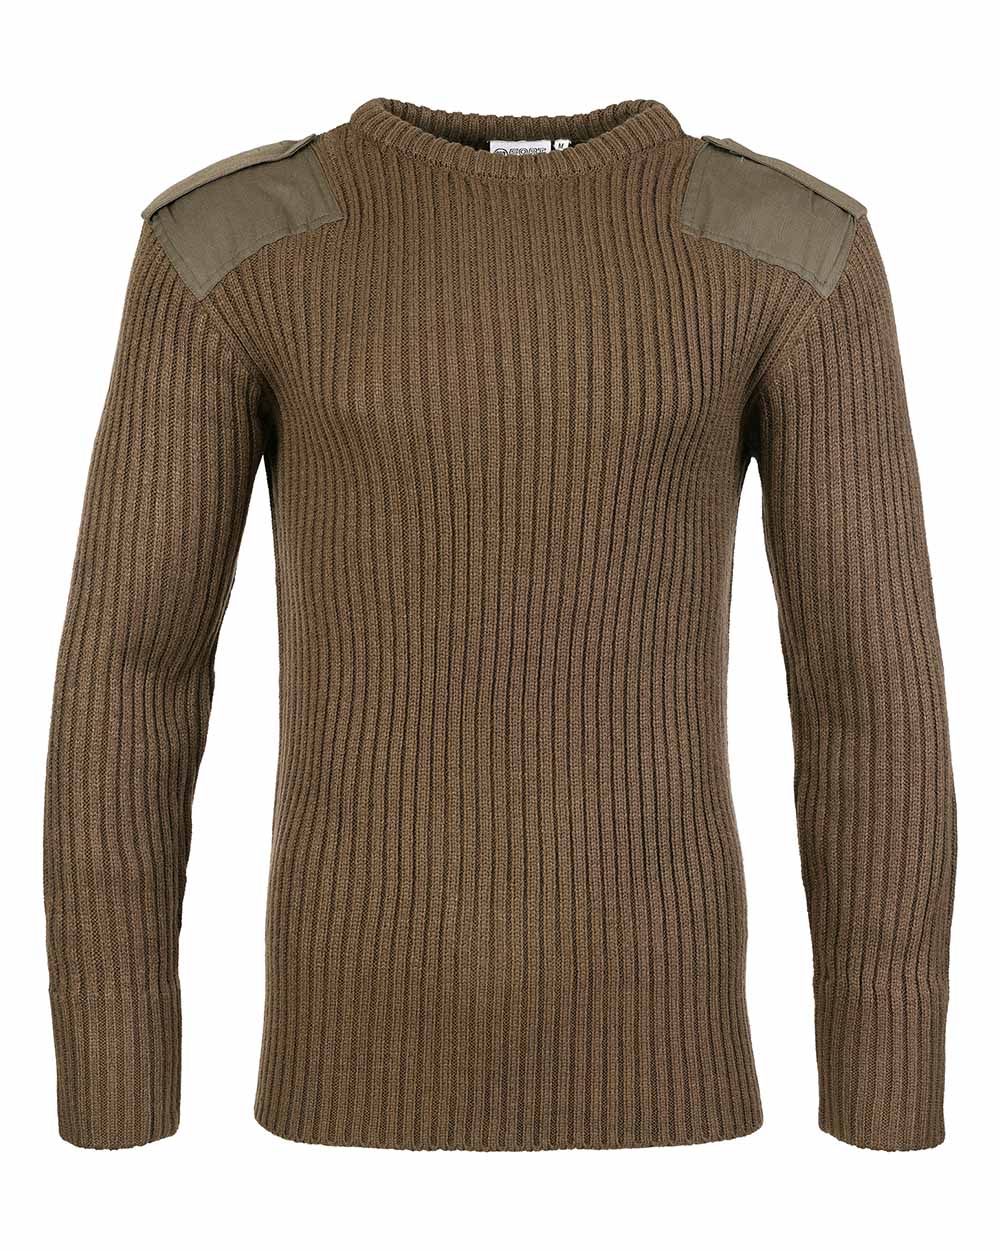 Olive Crew Neck Military Style Jumper by Fort 